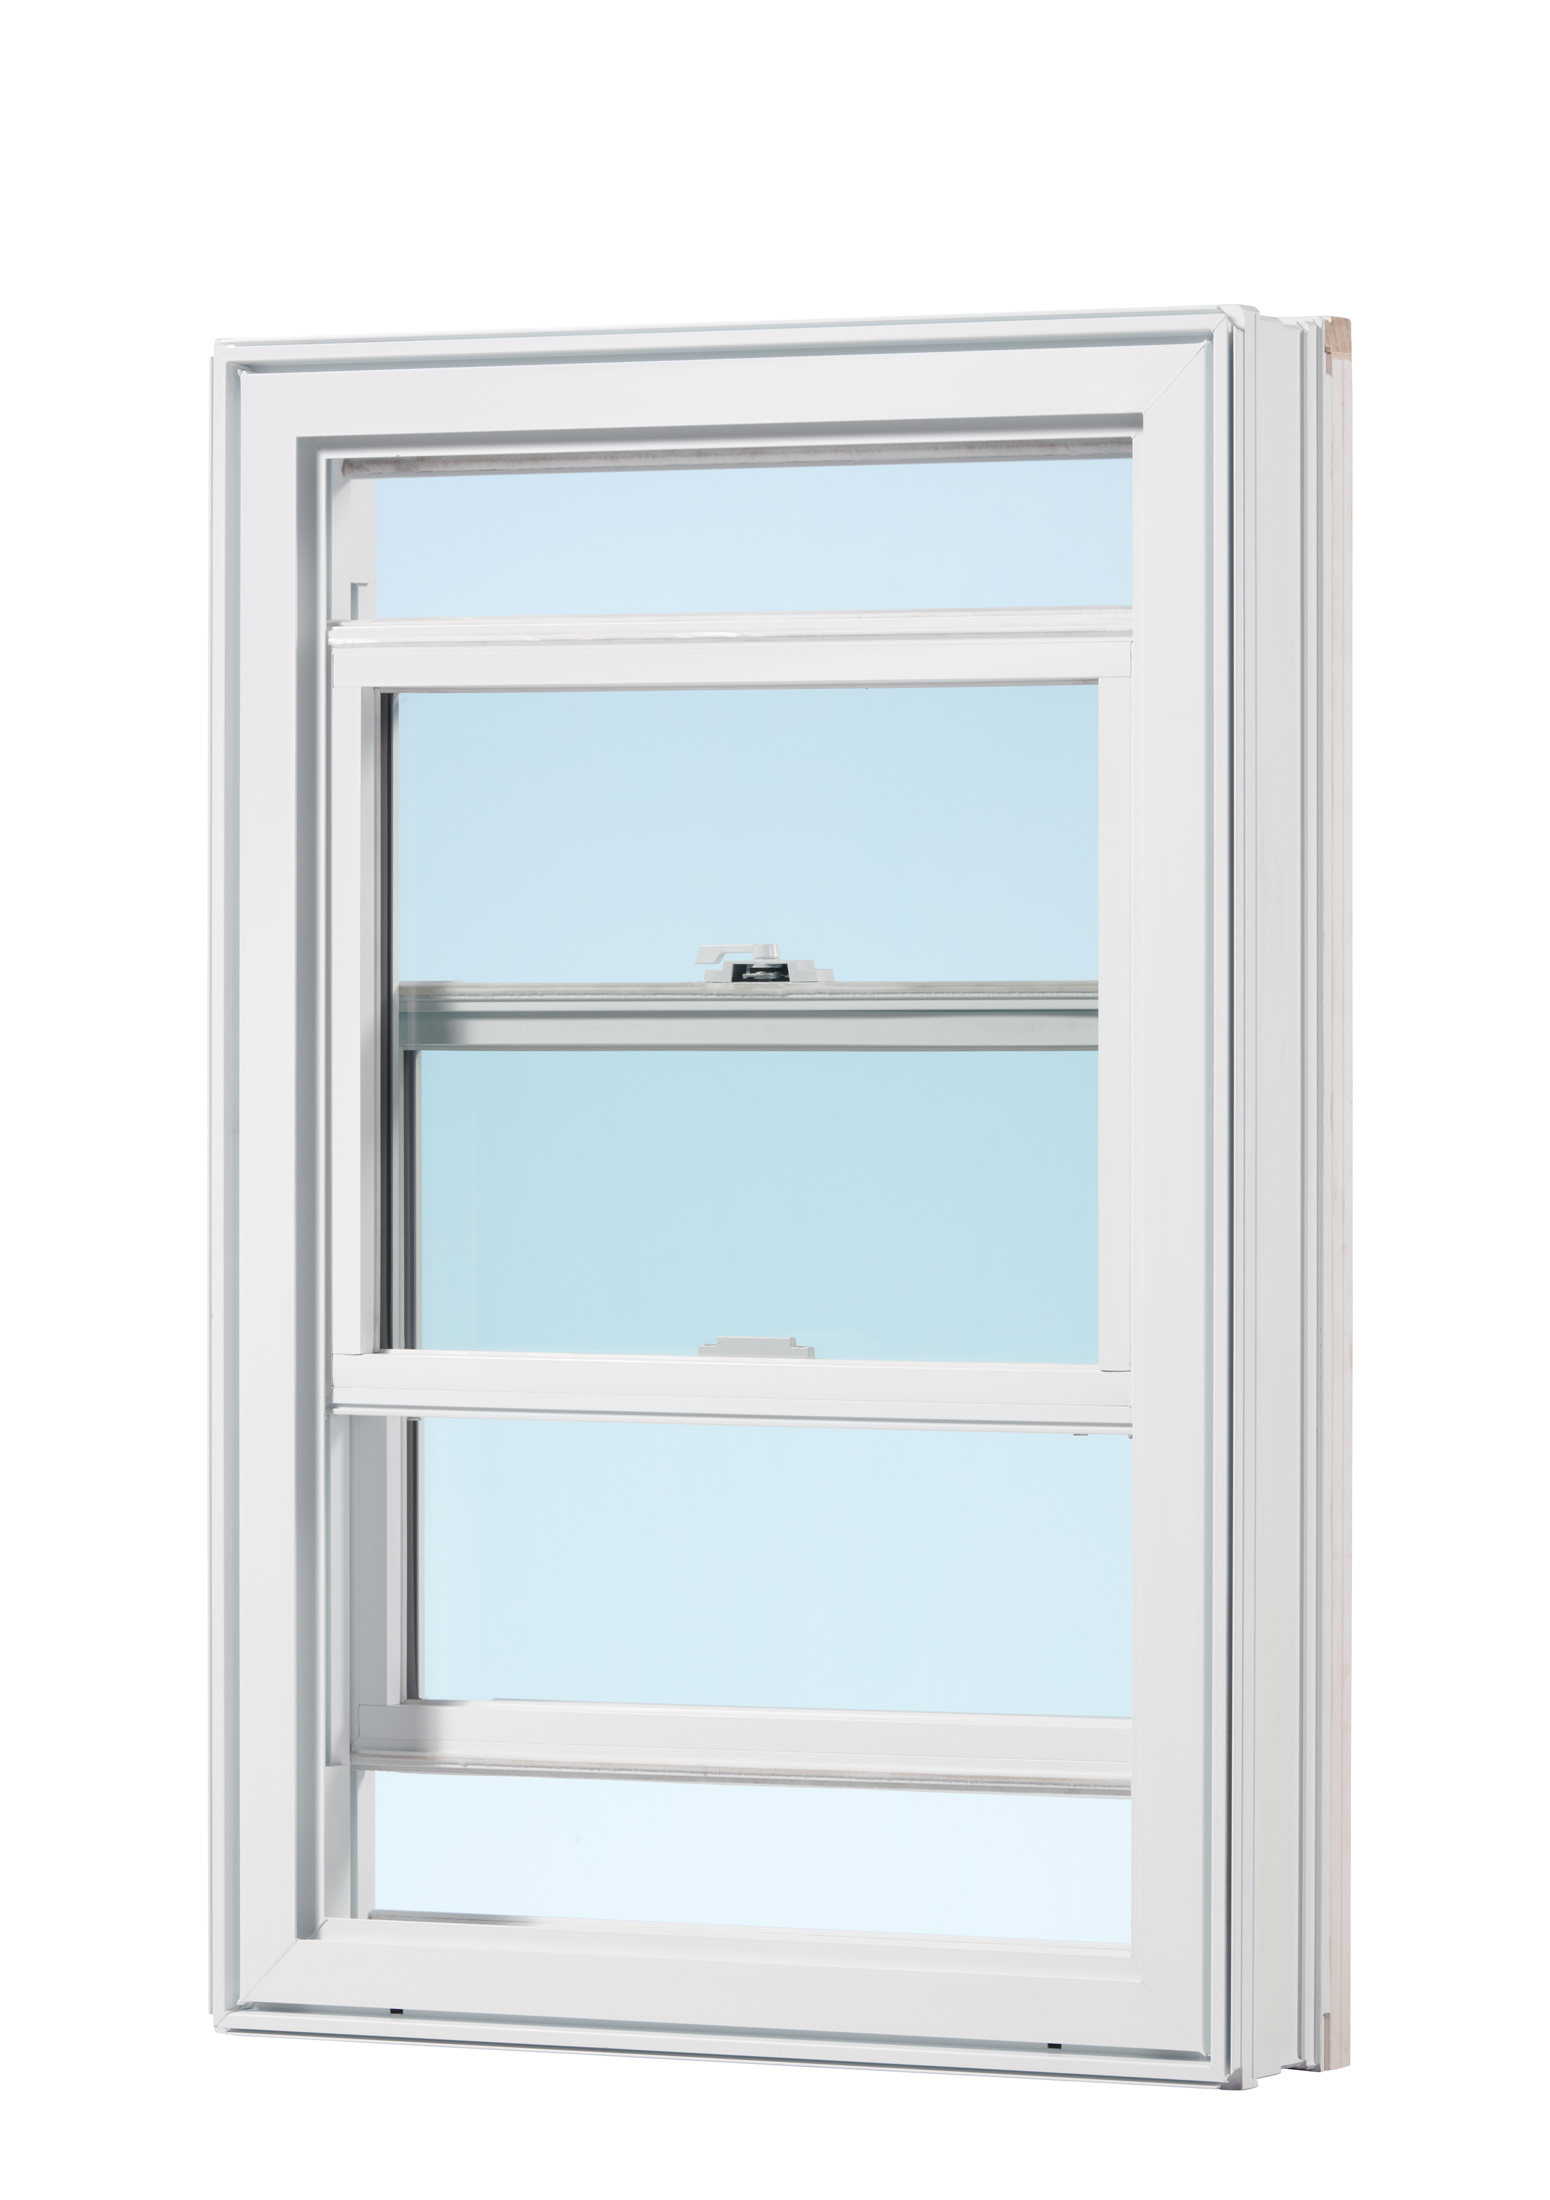 goldenvinyl®-1000-series-double-hung-window-img-1